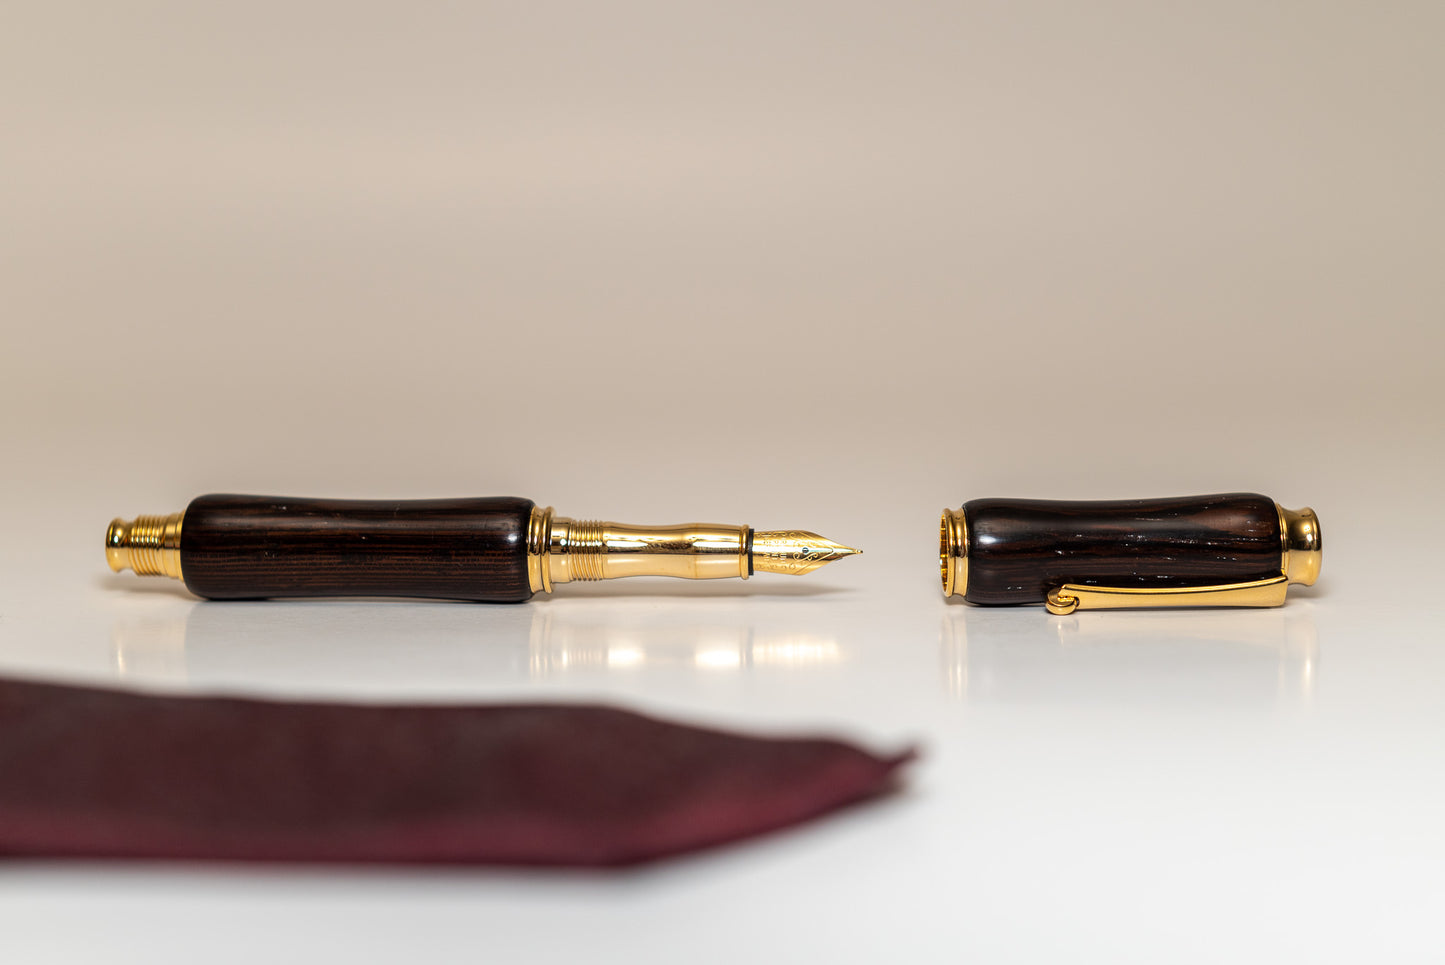 Wenge with Gold Hardware | Virage Fountain Pen